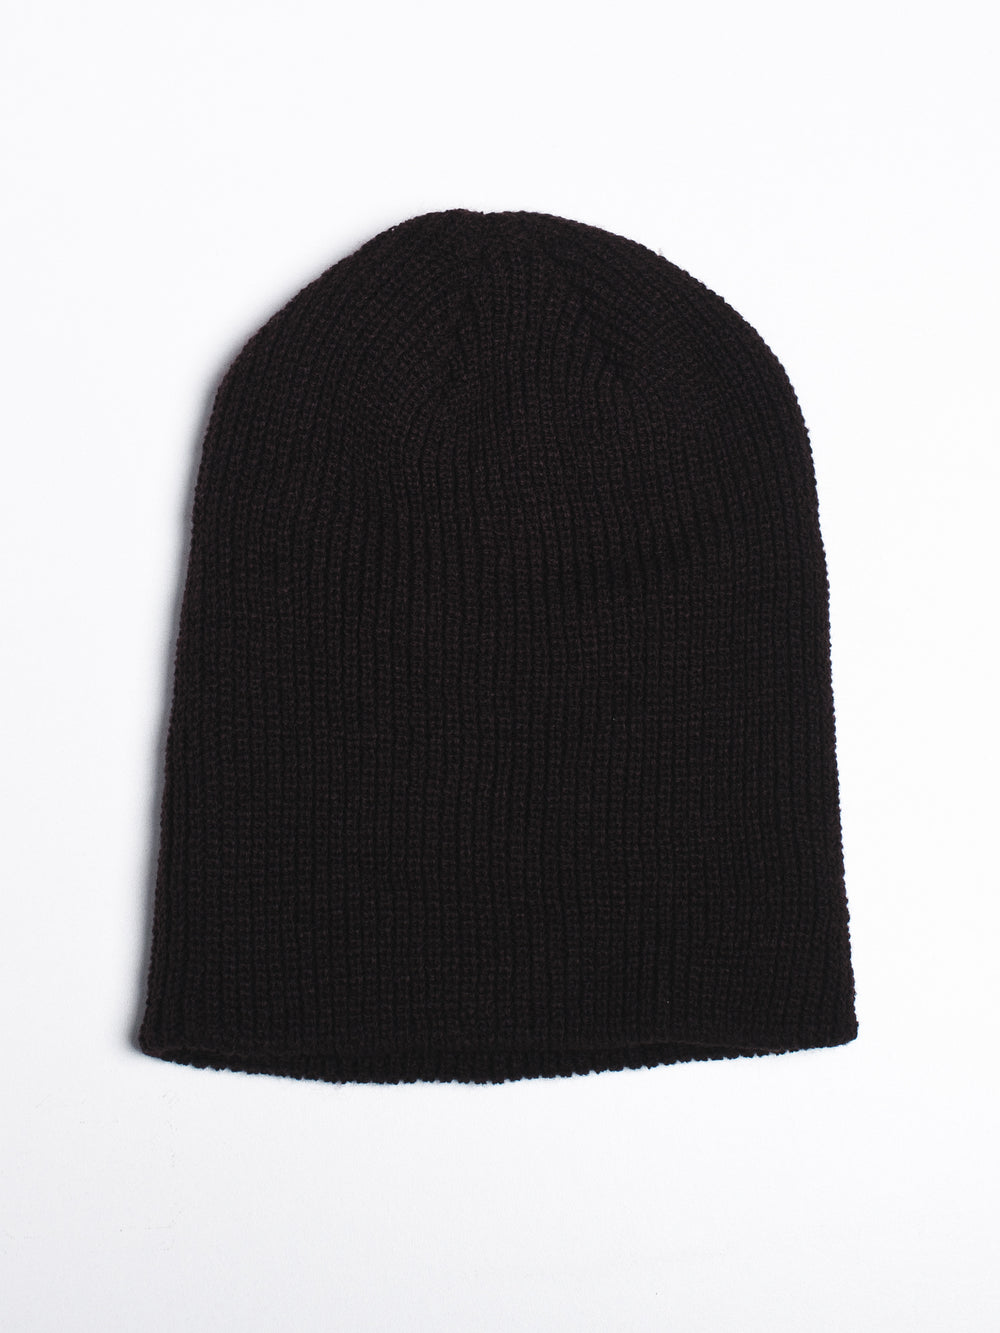 CLASSIC SOLID BEANIE BURGANDY - CLEARANCE